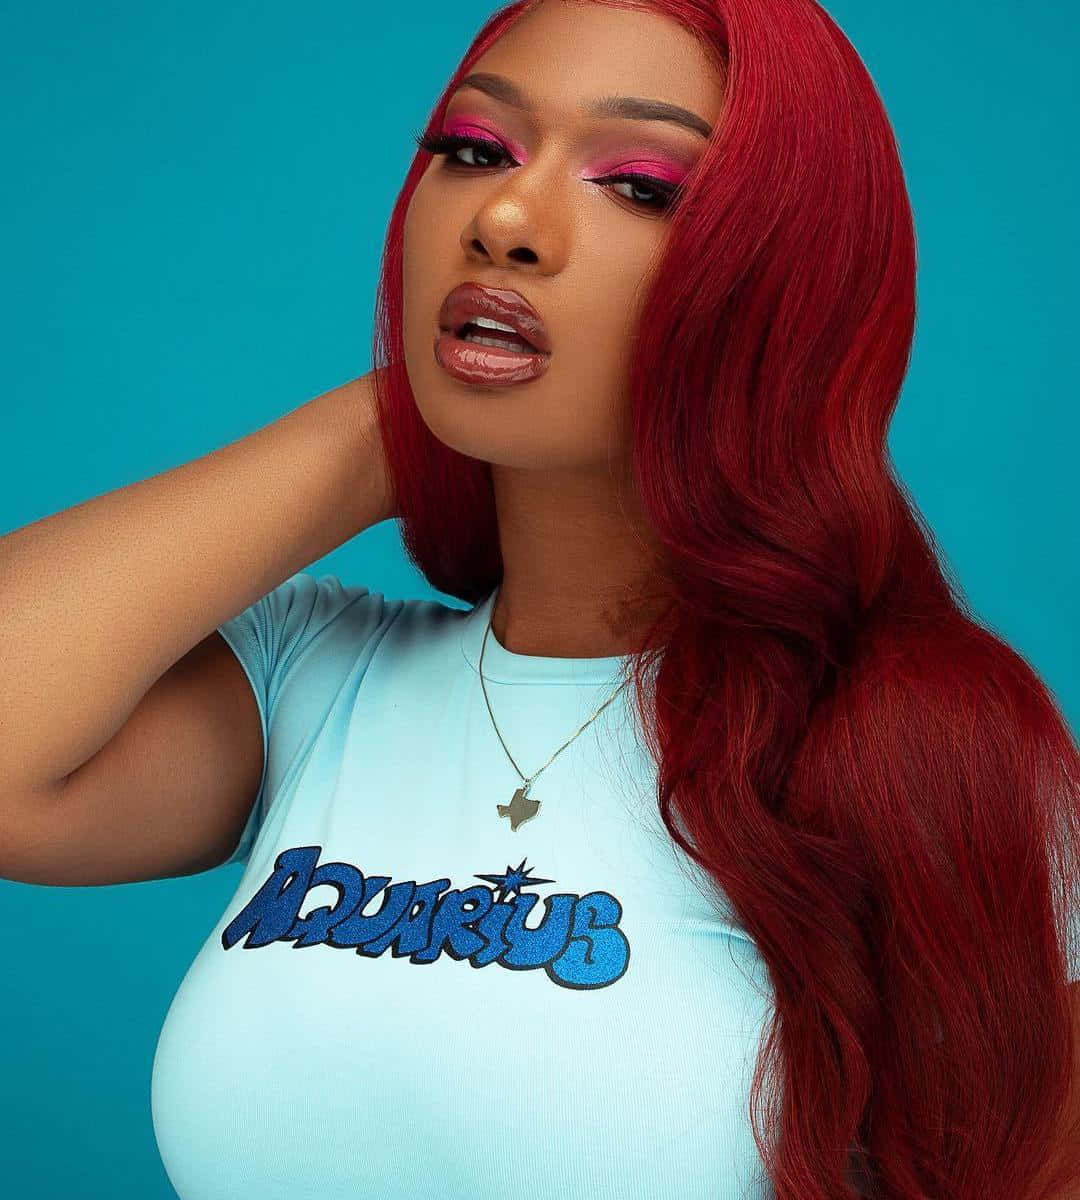 Megan Thee Stallion Stuns in a High-Fashion Look